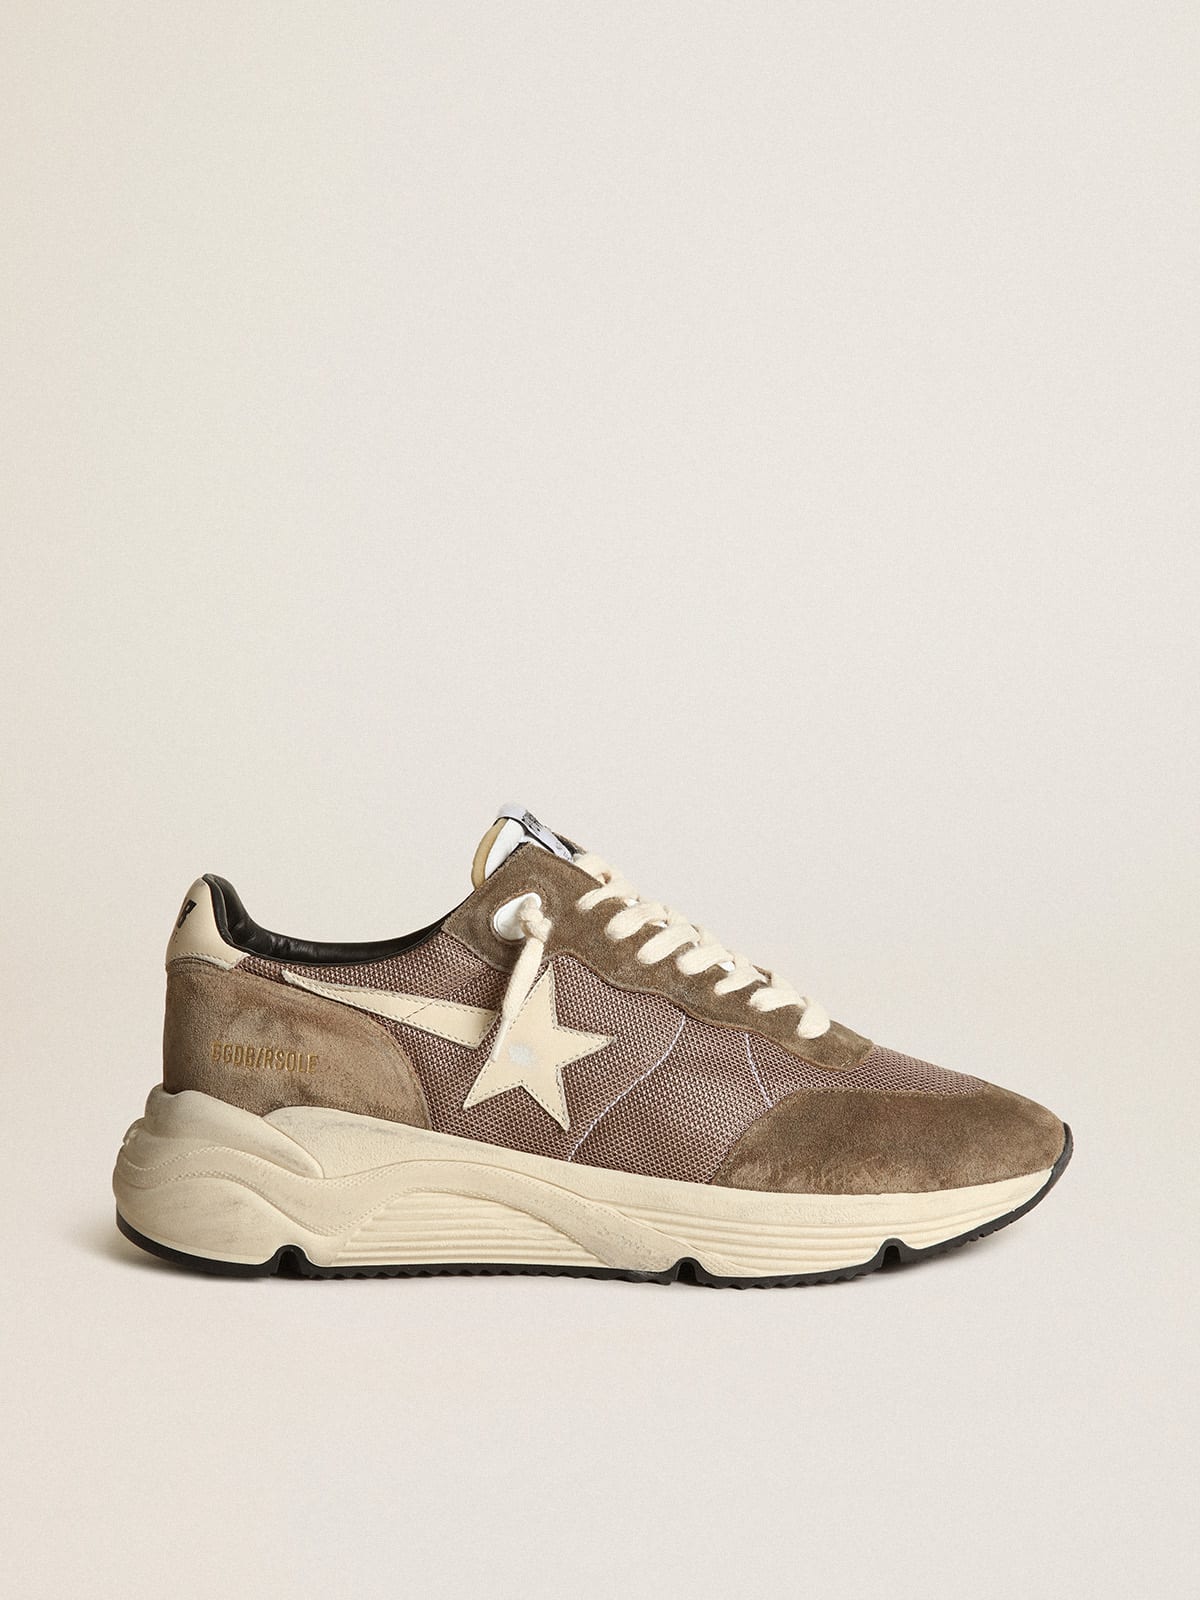 Golden Goose - Men's Running Sole in olive green mesh and leather with cream star in 